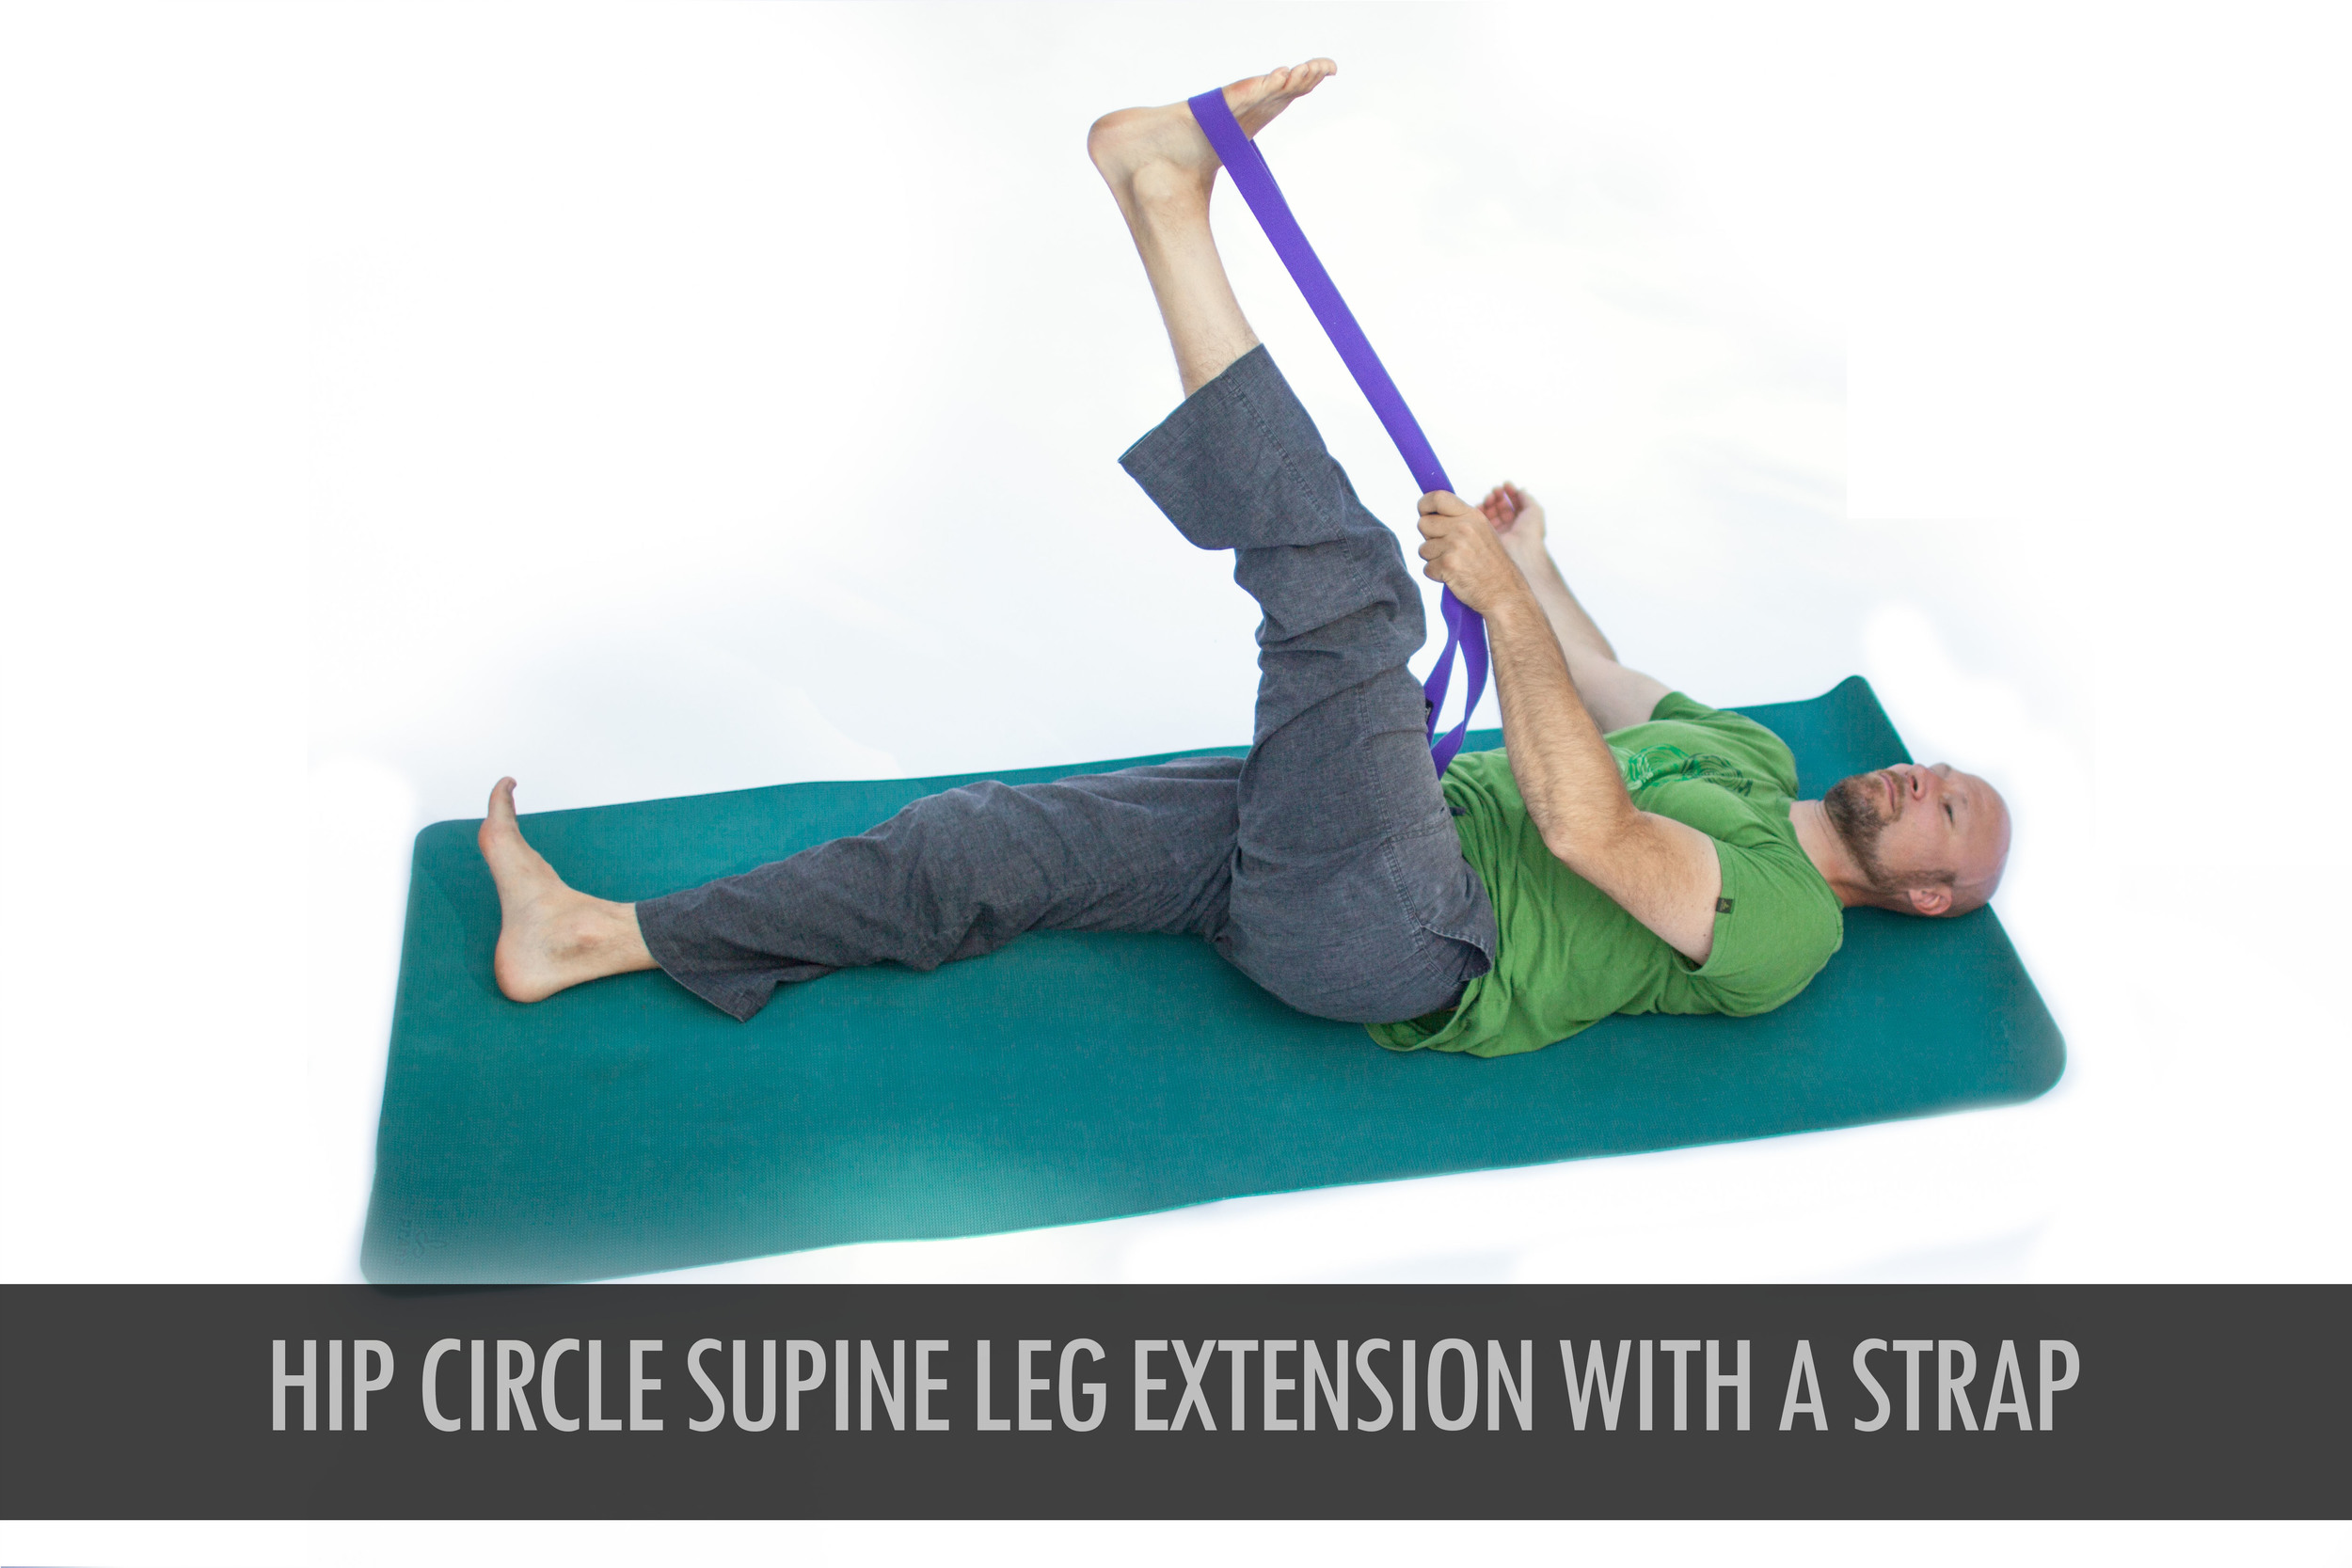 Hip Circle Supine Leg Extension With A Strap.jpg